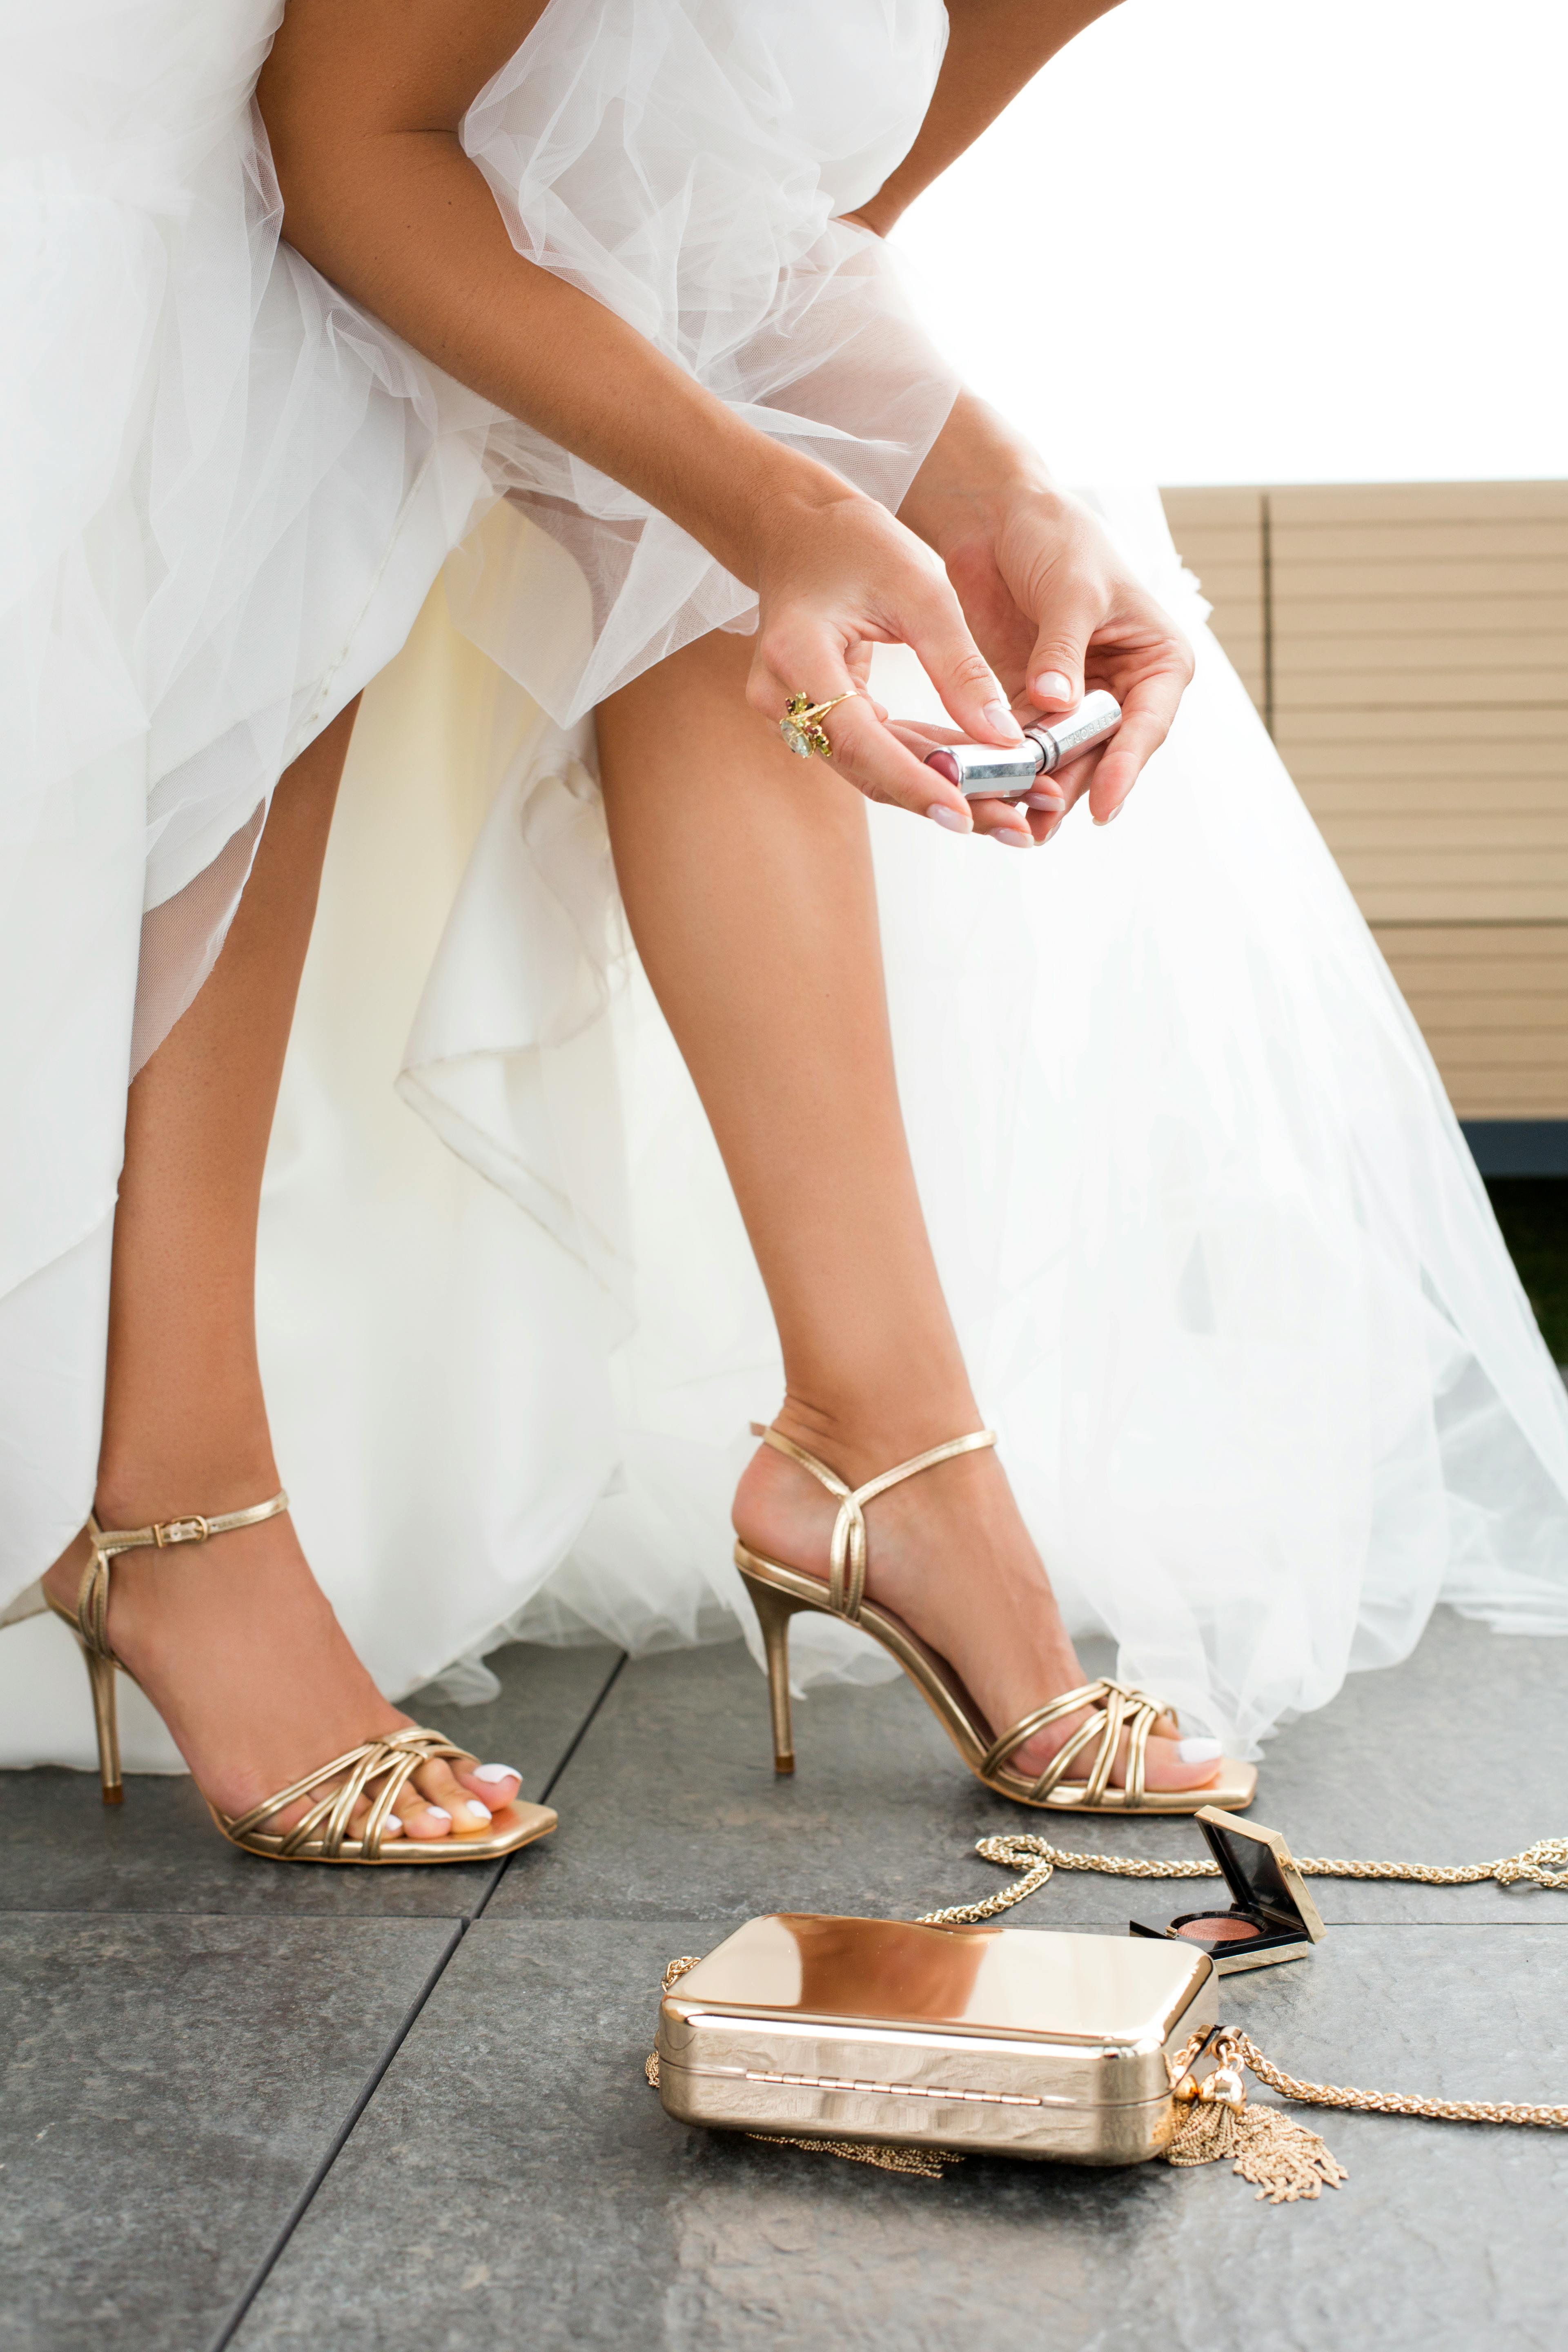 15 Things All Brides Regret After Buying Their Wedding Shoes